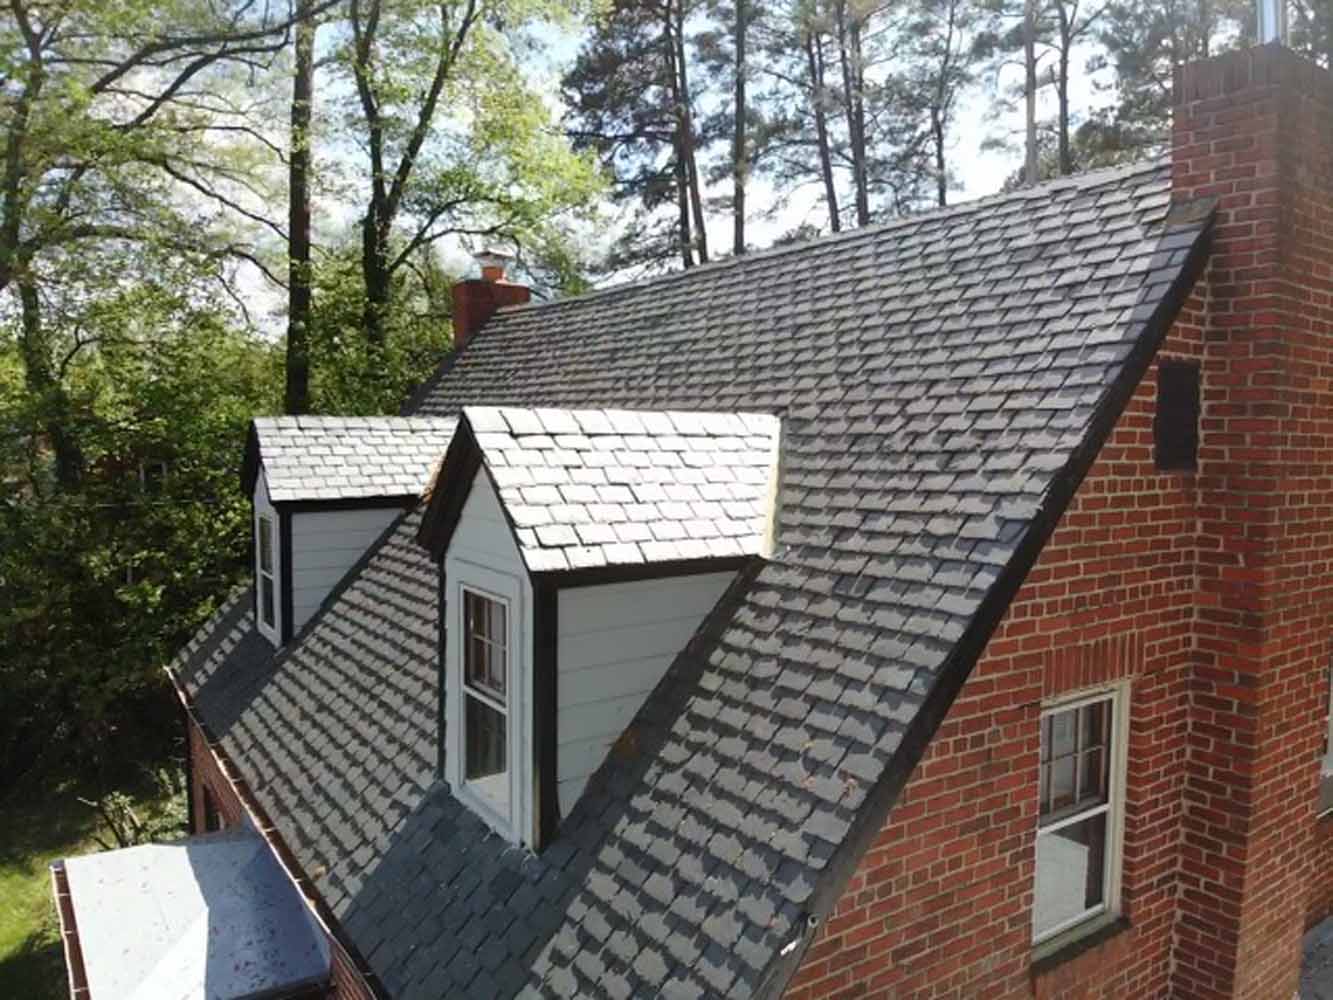 Aerial view of a brick house with multiple gray slate roofs and dormer windows surrounded by trees. 